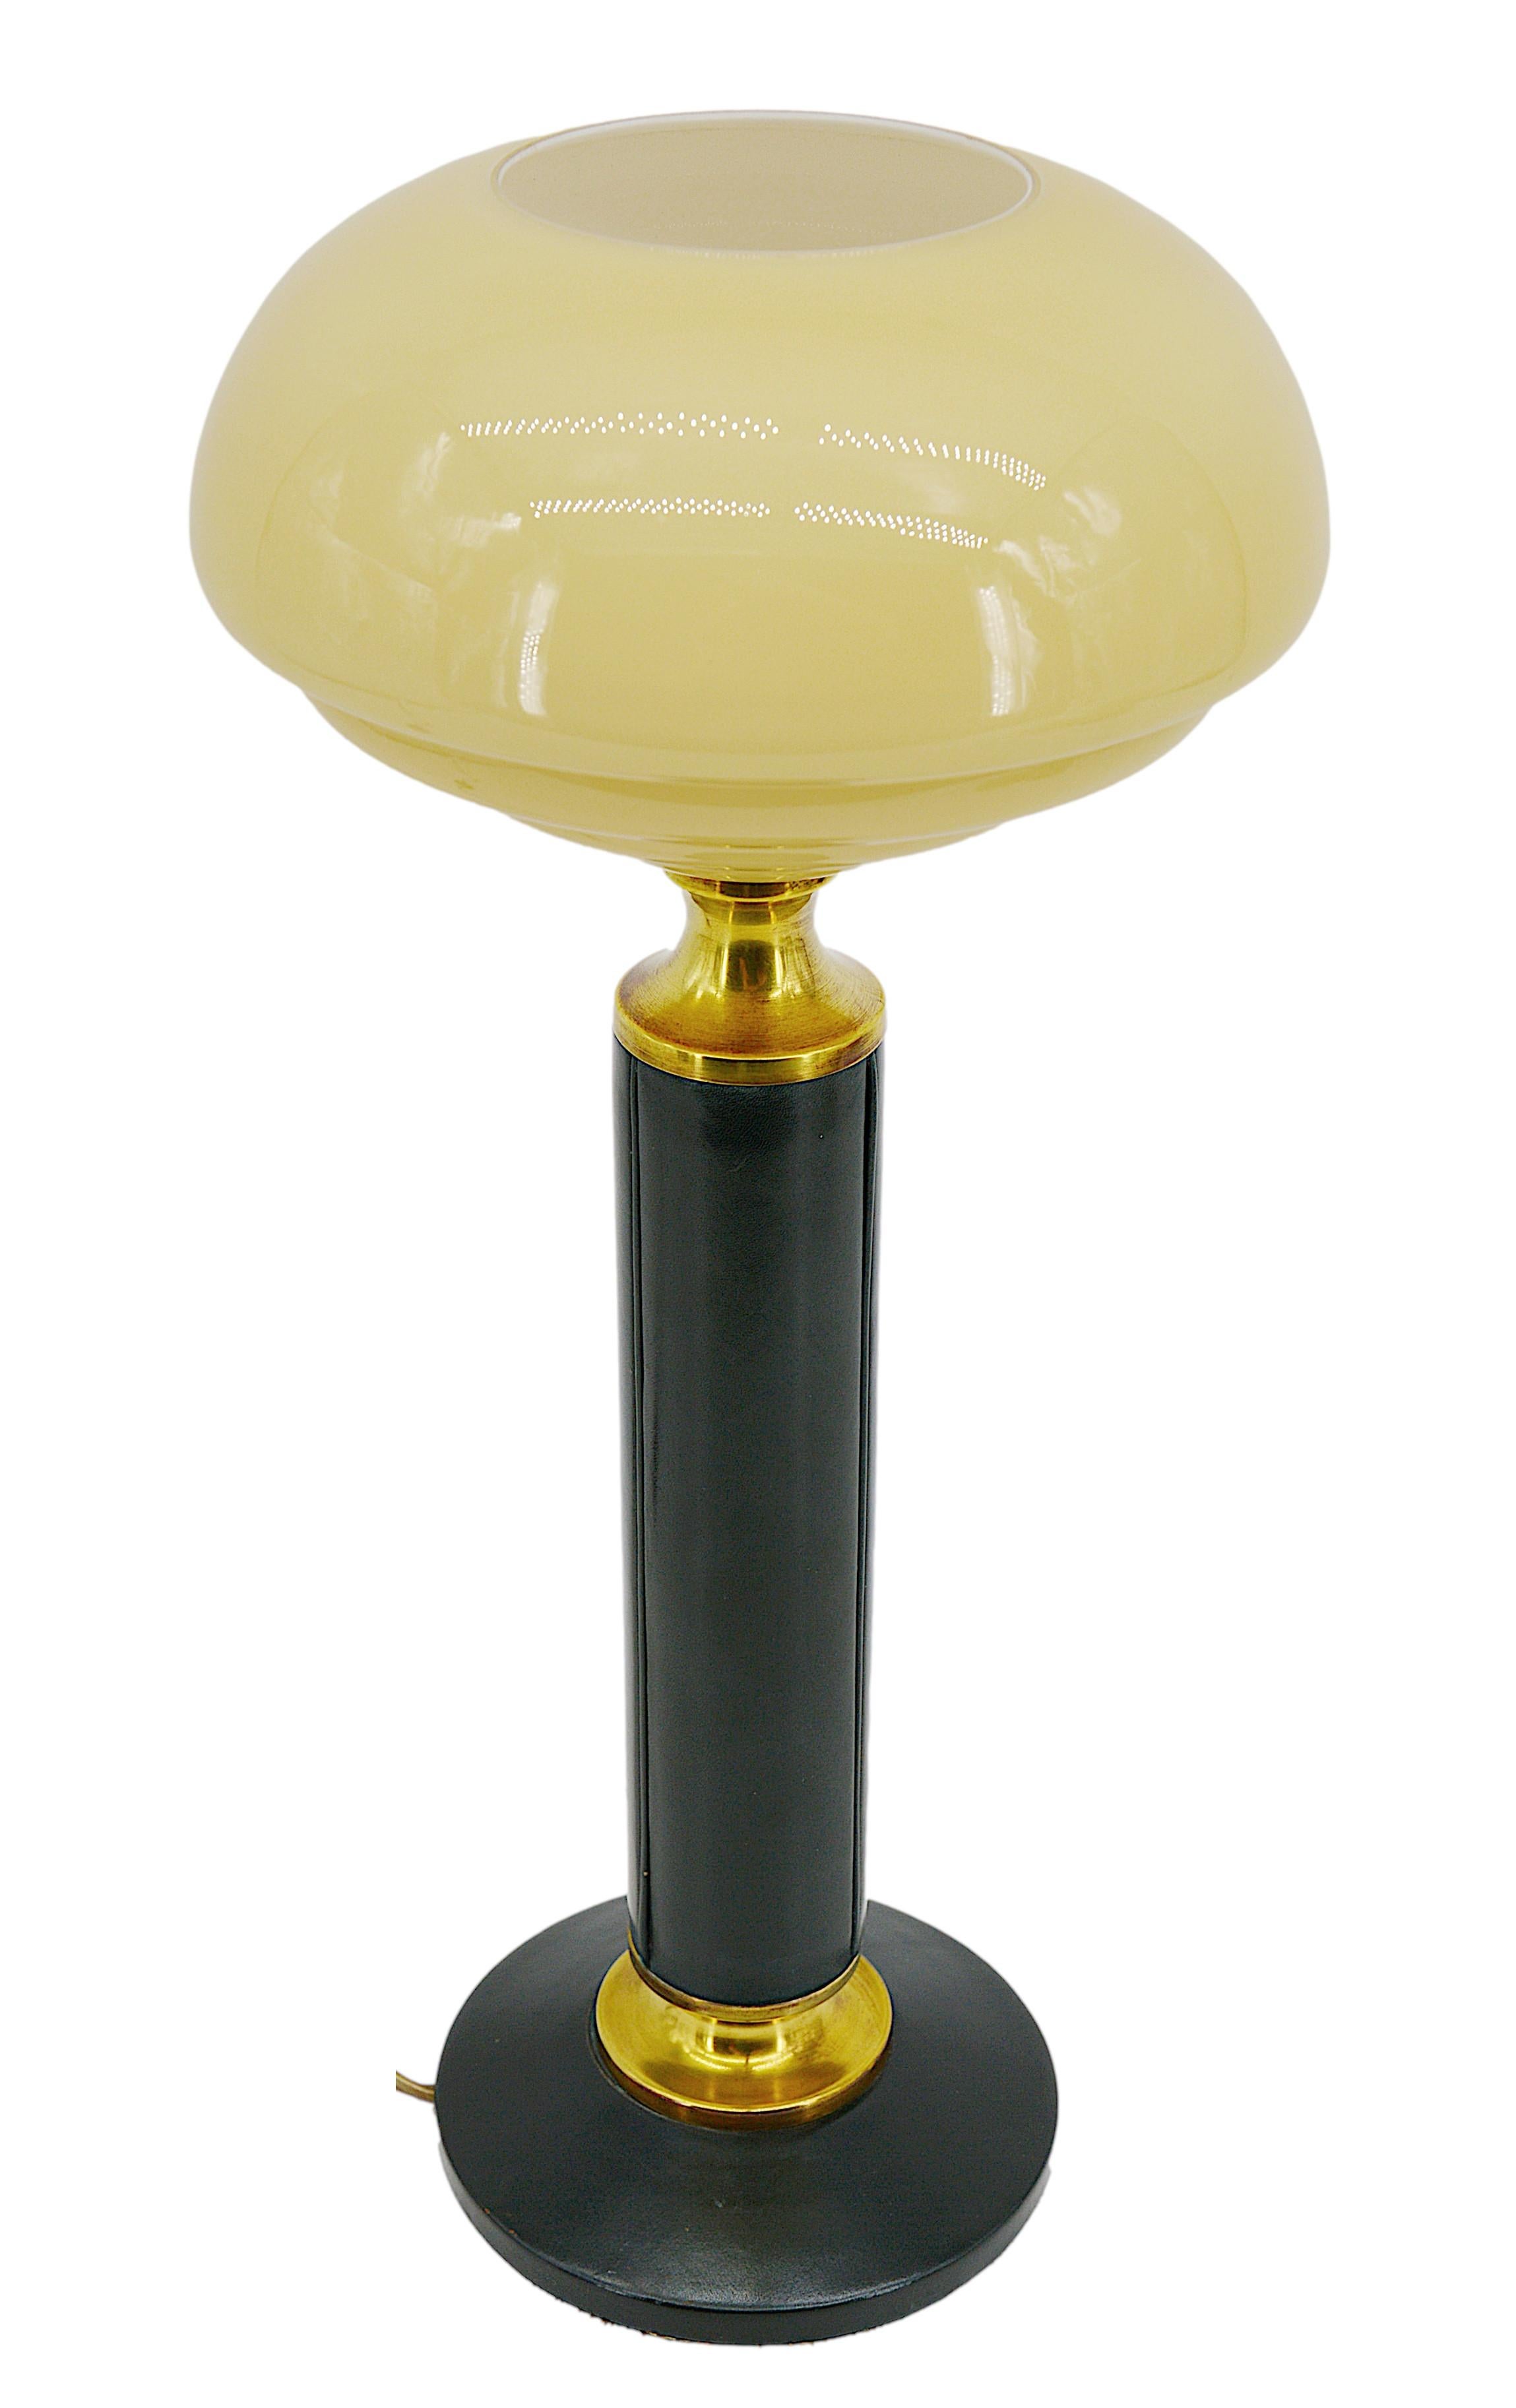 Mid-20th Century French Art Deco Leather Table Lamp, 1930s